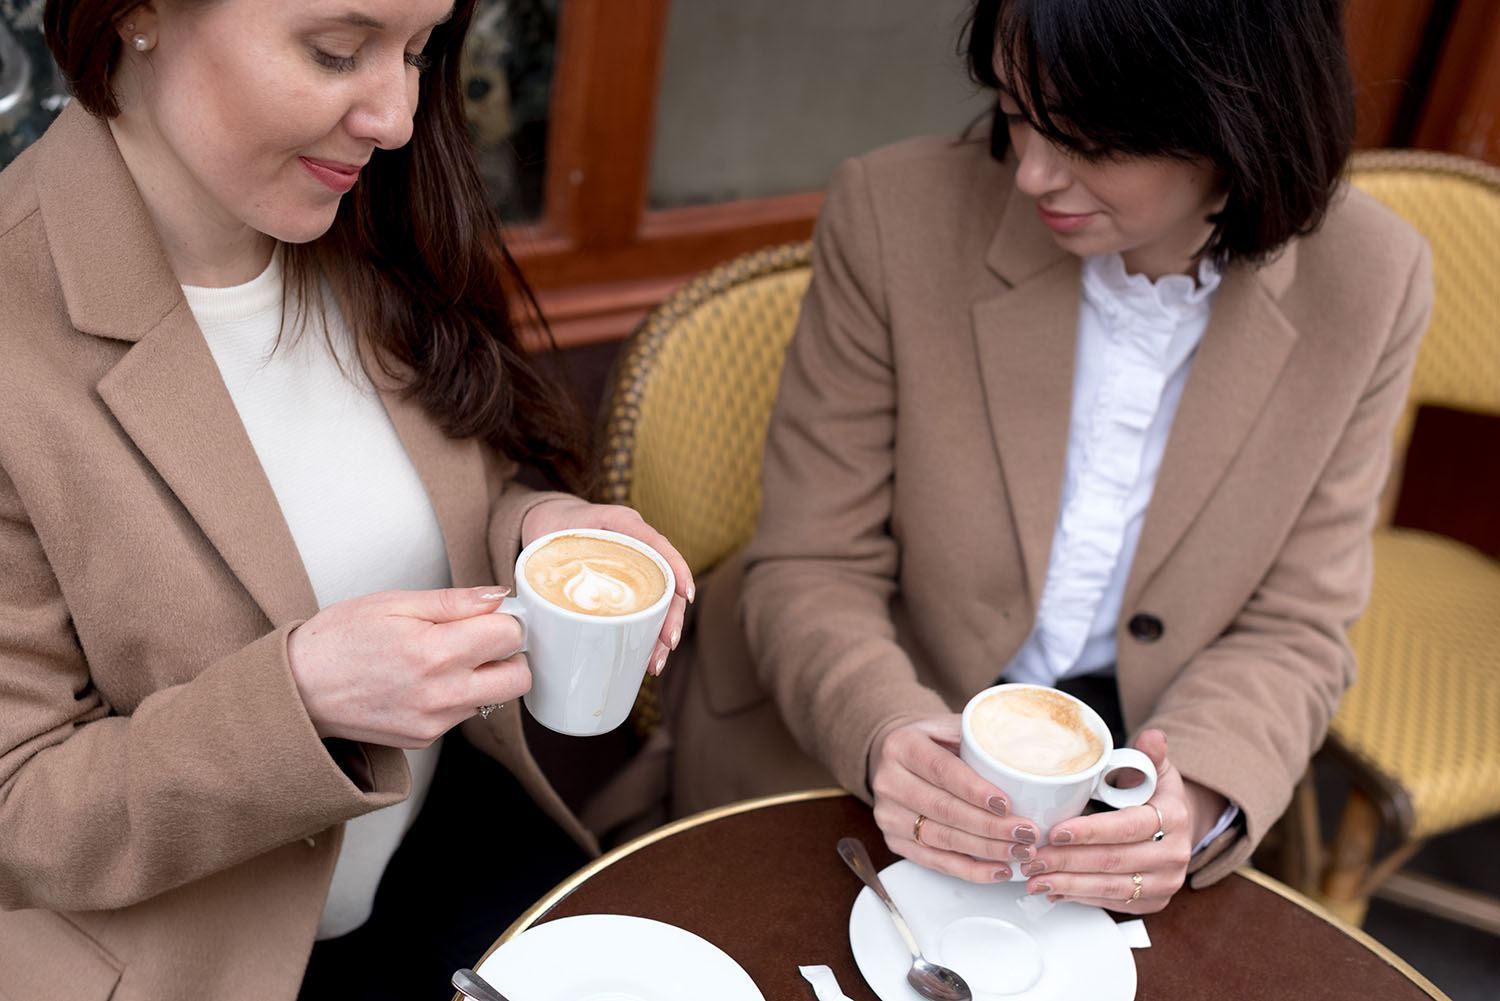 Top Canadian fashion bloggers Cee Fardoe of Coco & Vera and Lyndi Barrett of Style calling drinks cafe creme in Paris, wearing Uniqlo camel coats